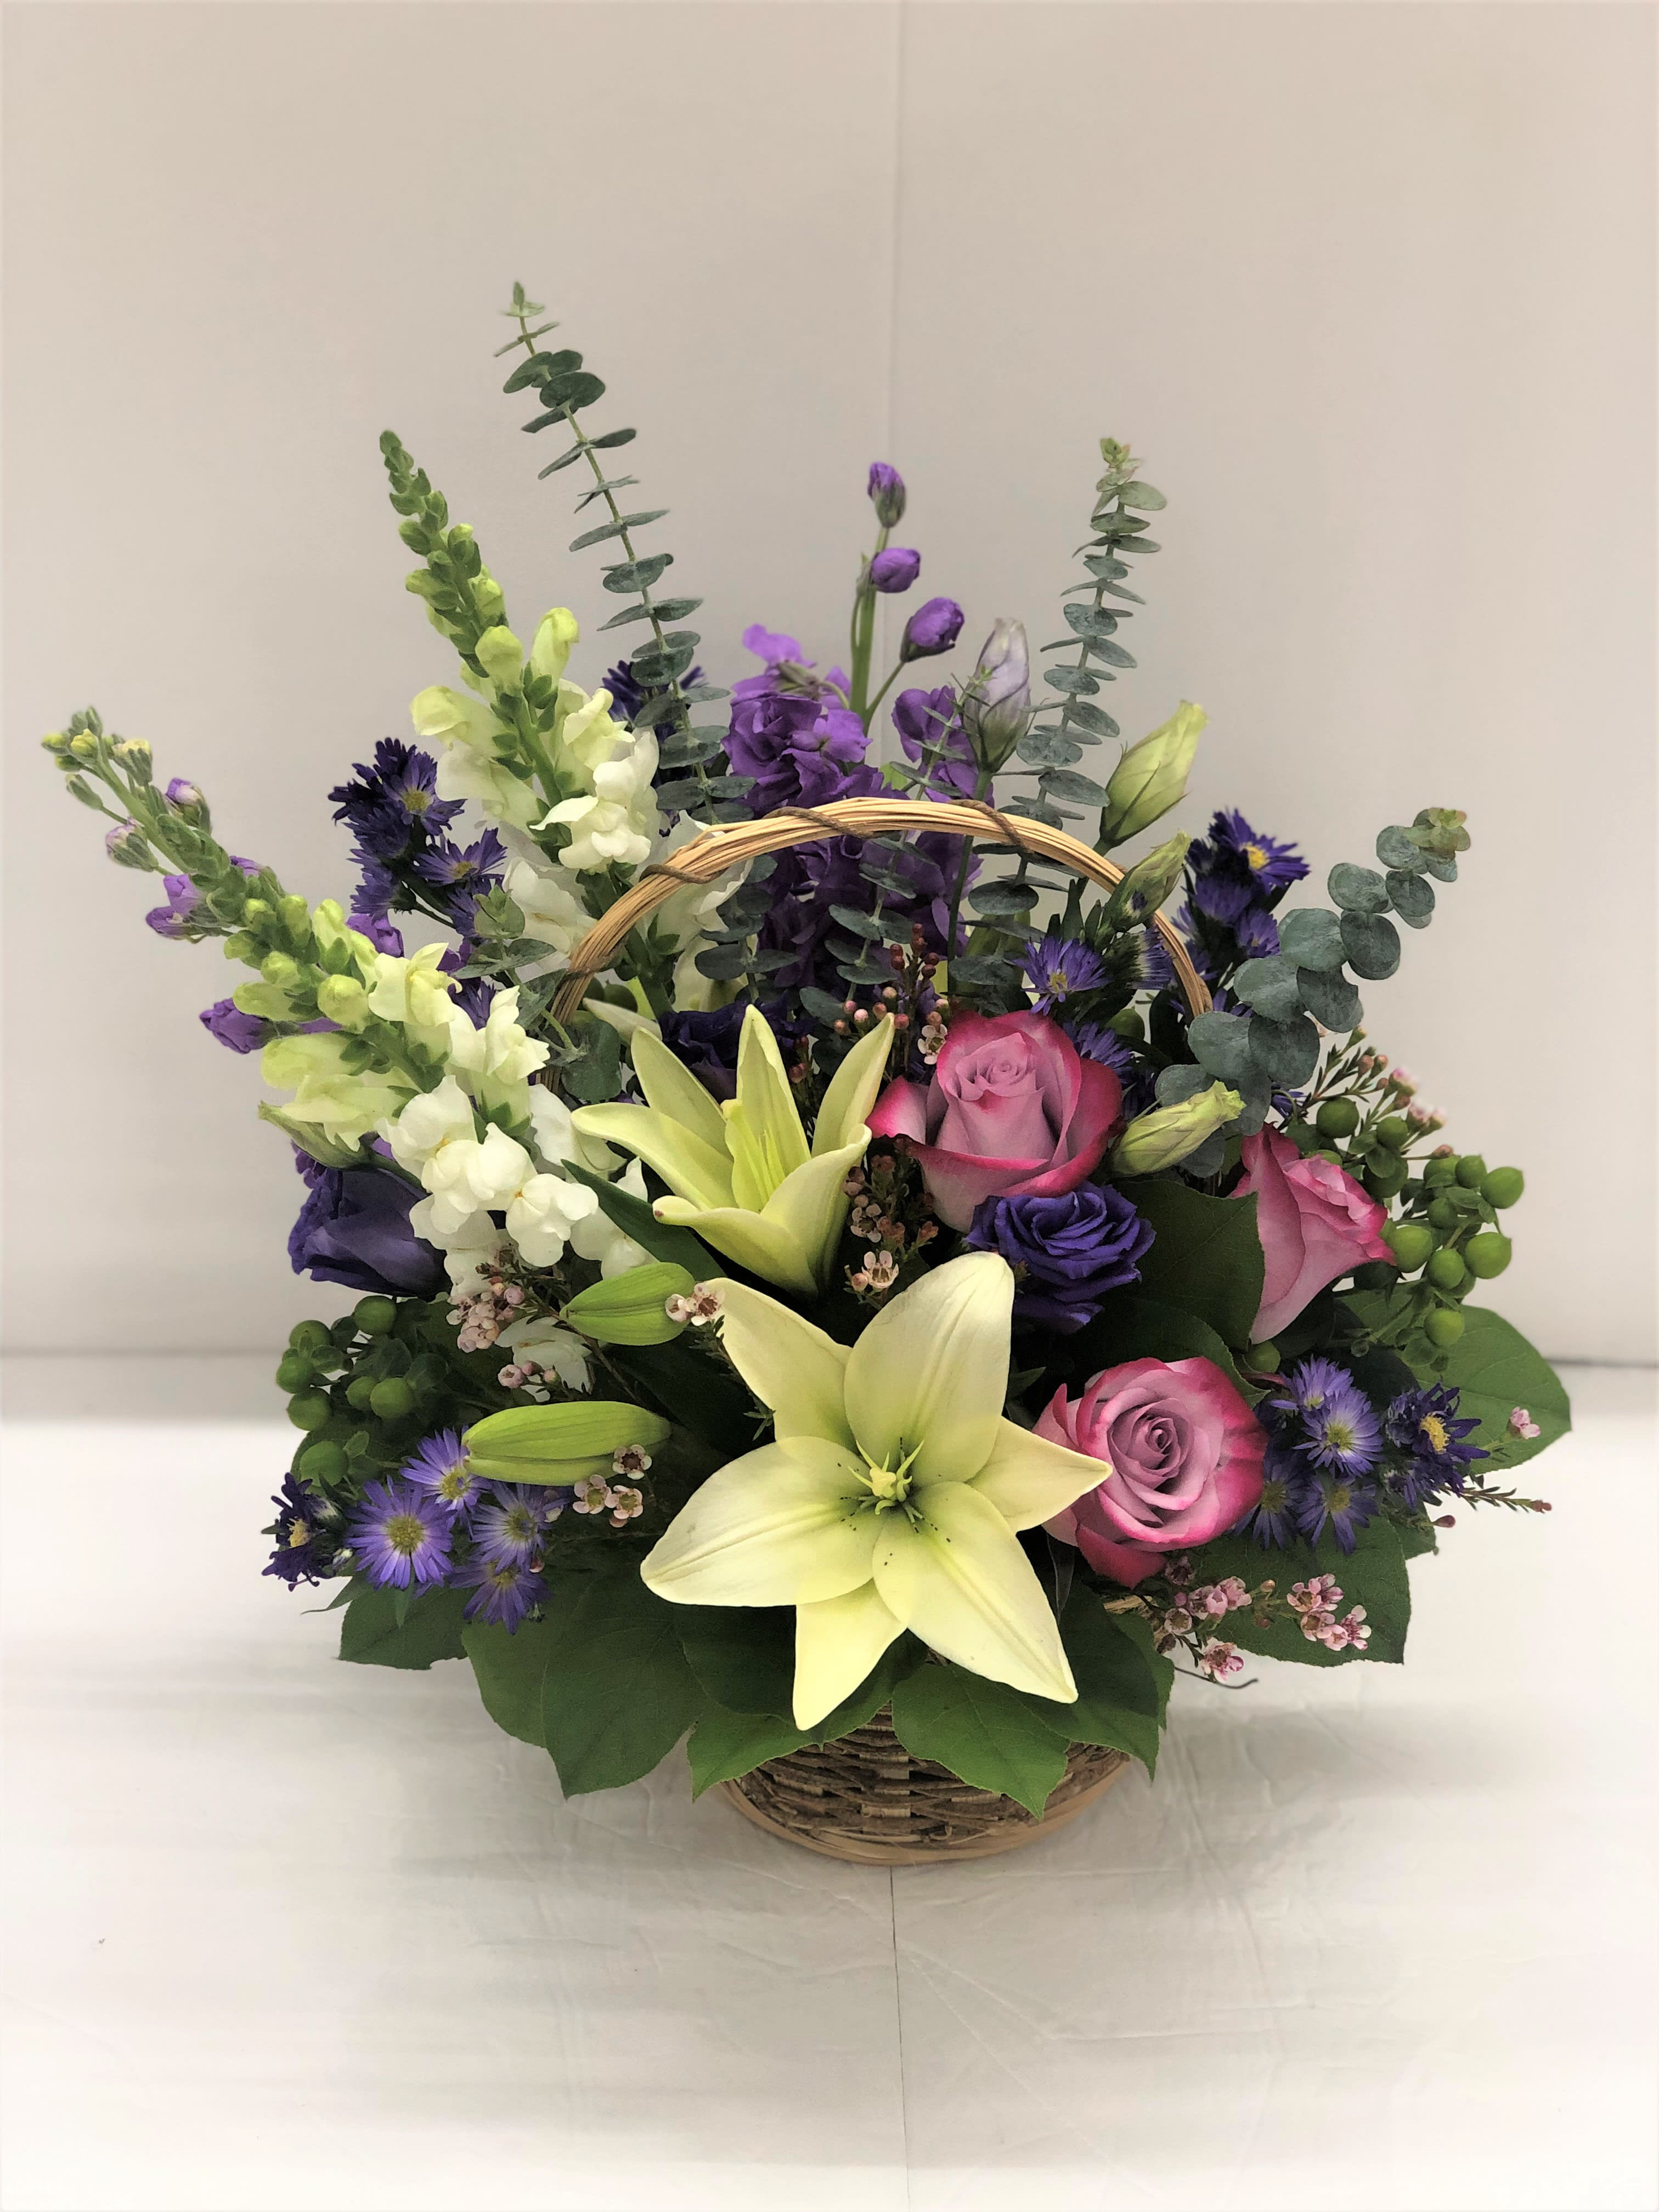 Loving Lavender Basket - A nice assortment of purple, lavender and white flowers arranged together if perfect harmony. 